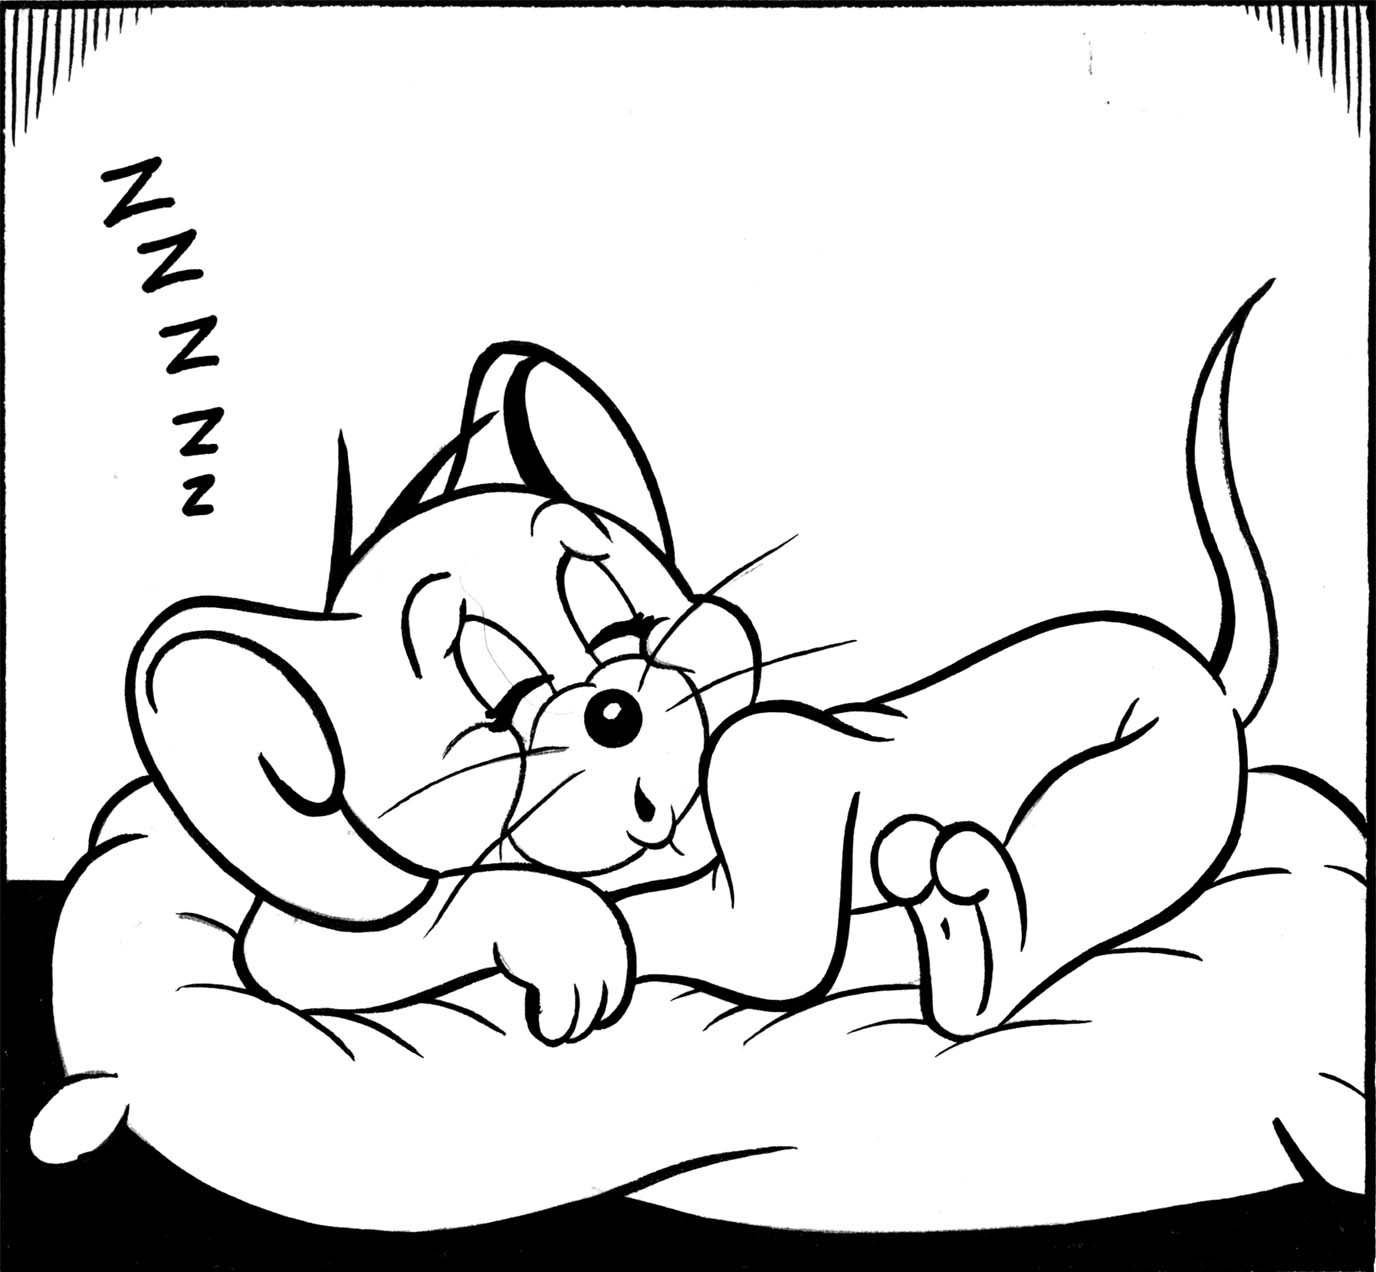 Free Printable Tom And Jerry Coloring Pages For Kids - Coloring Home - Free Printable Tom And Jerry Coloring Pages